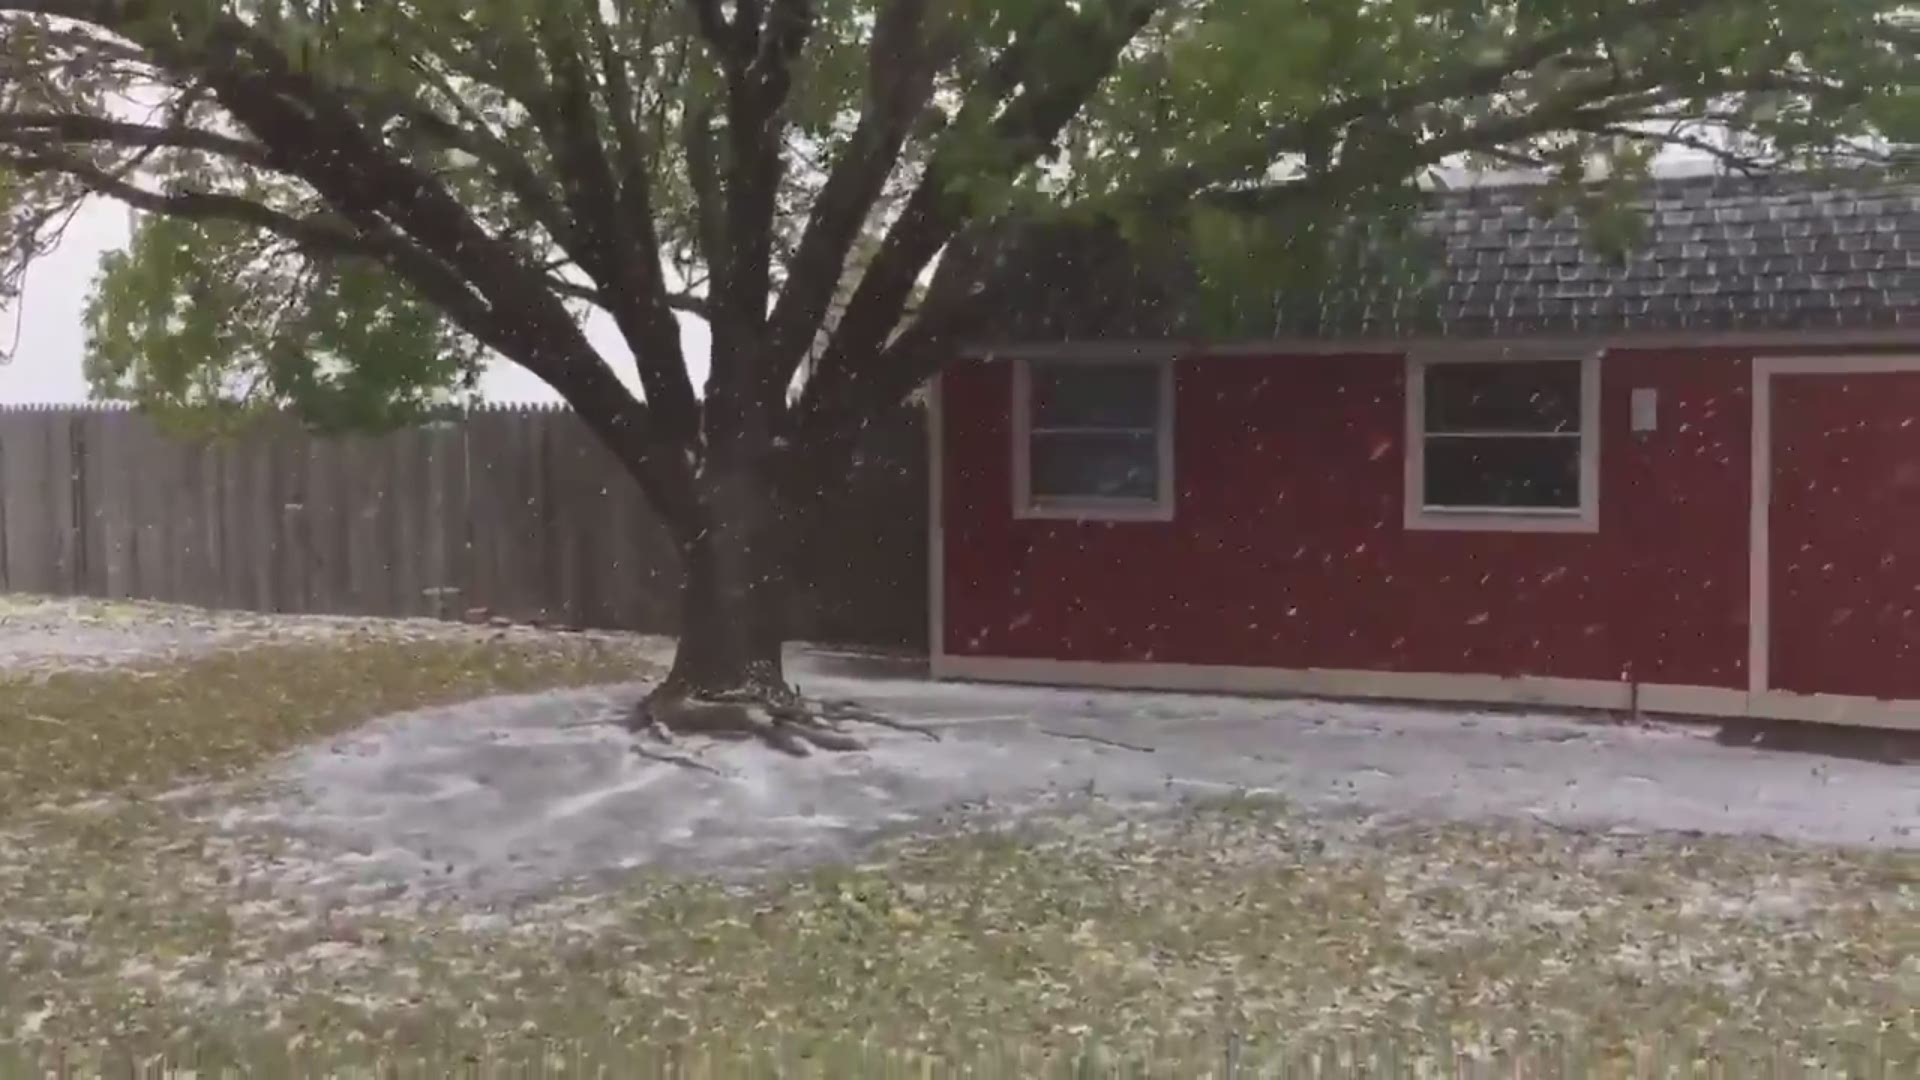 Ricky Mourning sent this video to KHOU 11, showing flakes flying about 80 miles north of Amarillo, in Stratford, TX today, October 14, 2018. Stratford is a tiny town in the high plains of the TX panhandle, near the Oklahoma border. Its elevation is 3,600